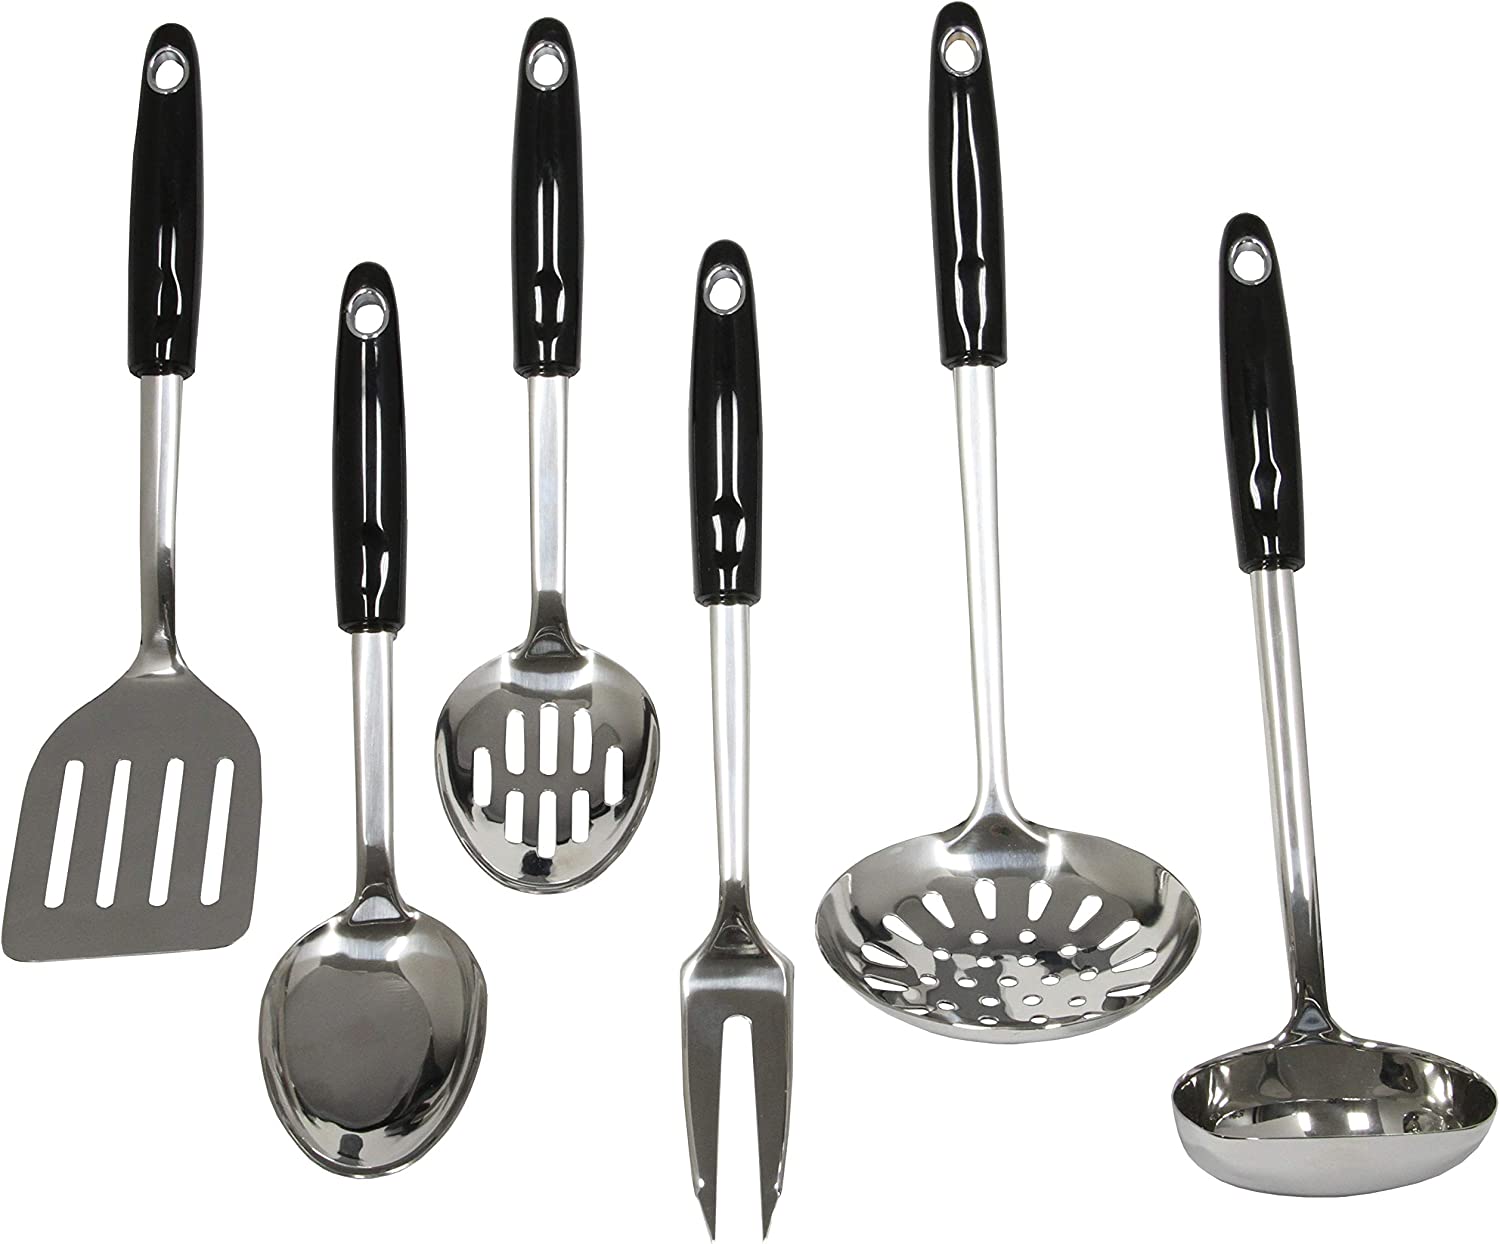 Chef Craft Heavy Duty Kitchen Tool and Utensil Set, 6 Piece, Stainless Steel